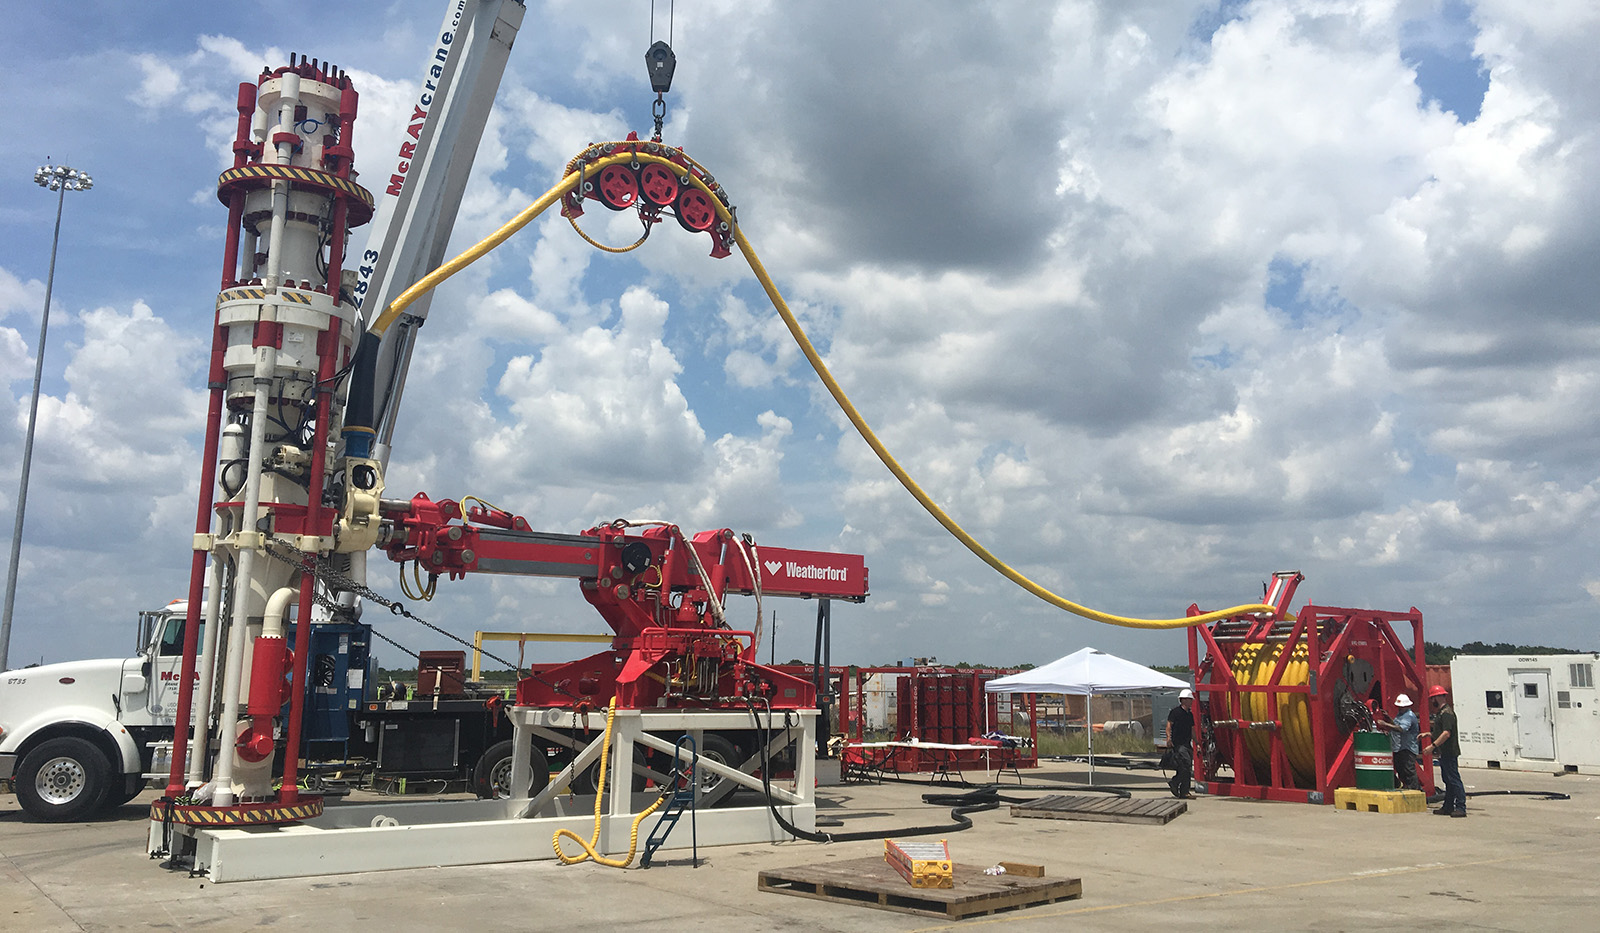 How fast can you rig up your Managed Pressure Drilling (MPD) system?